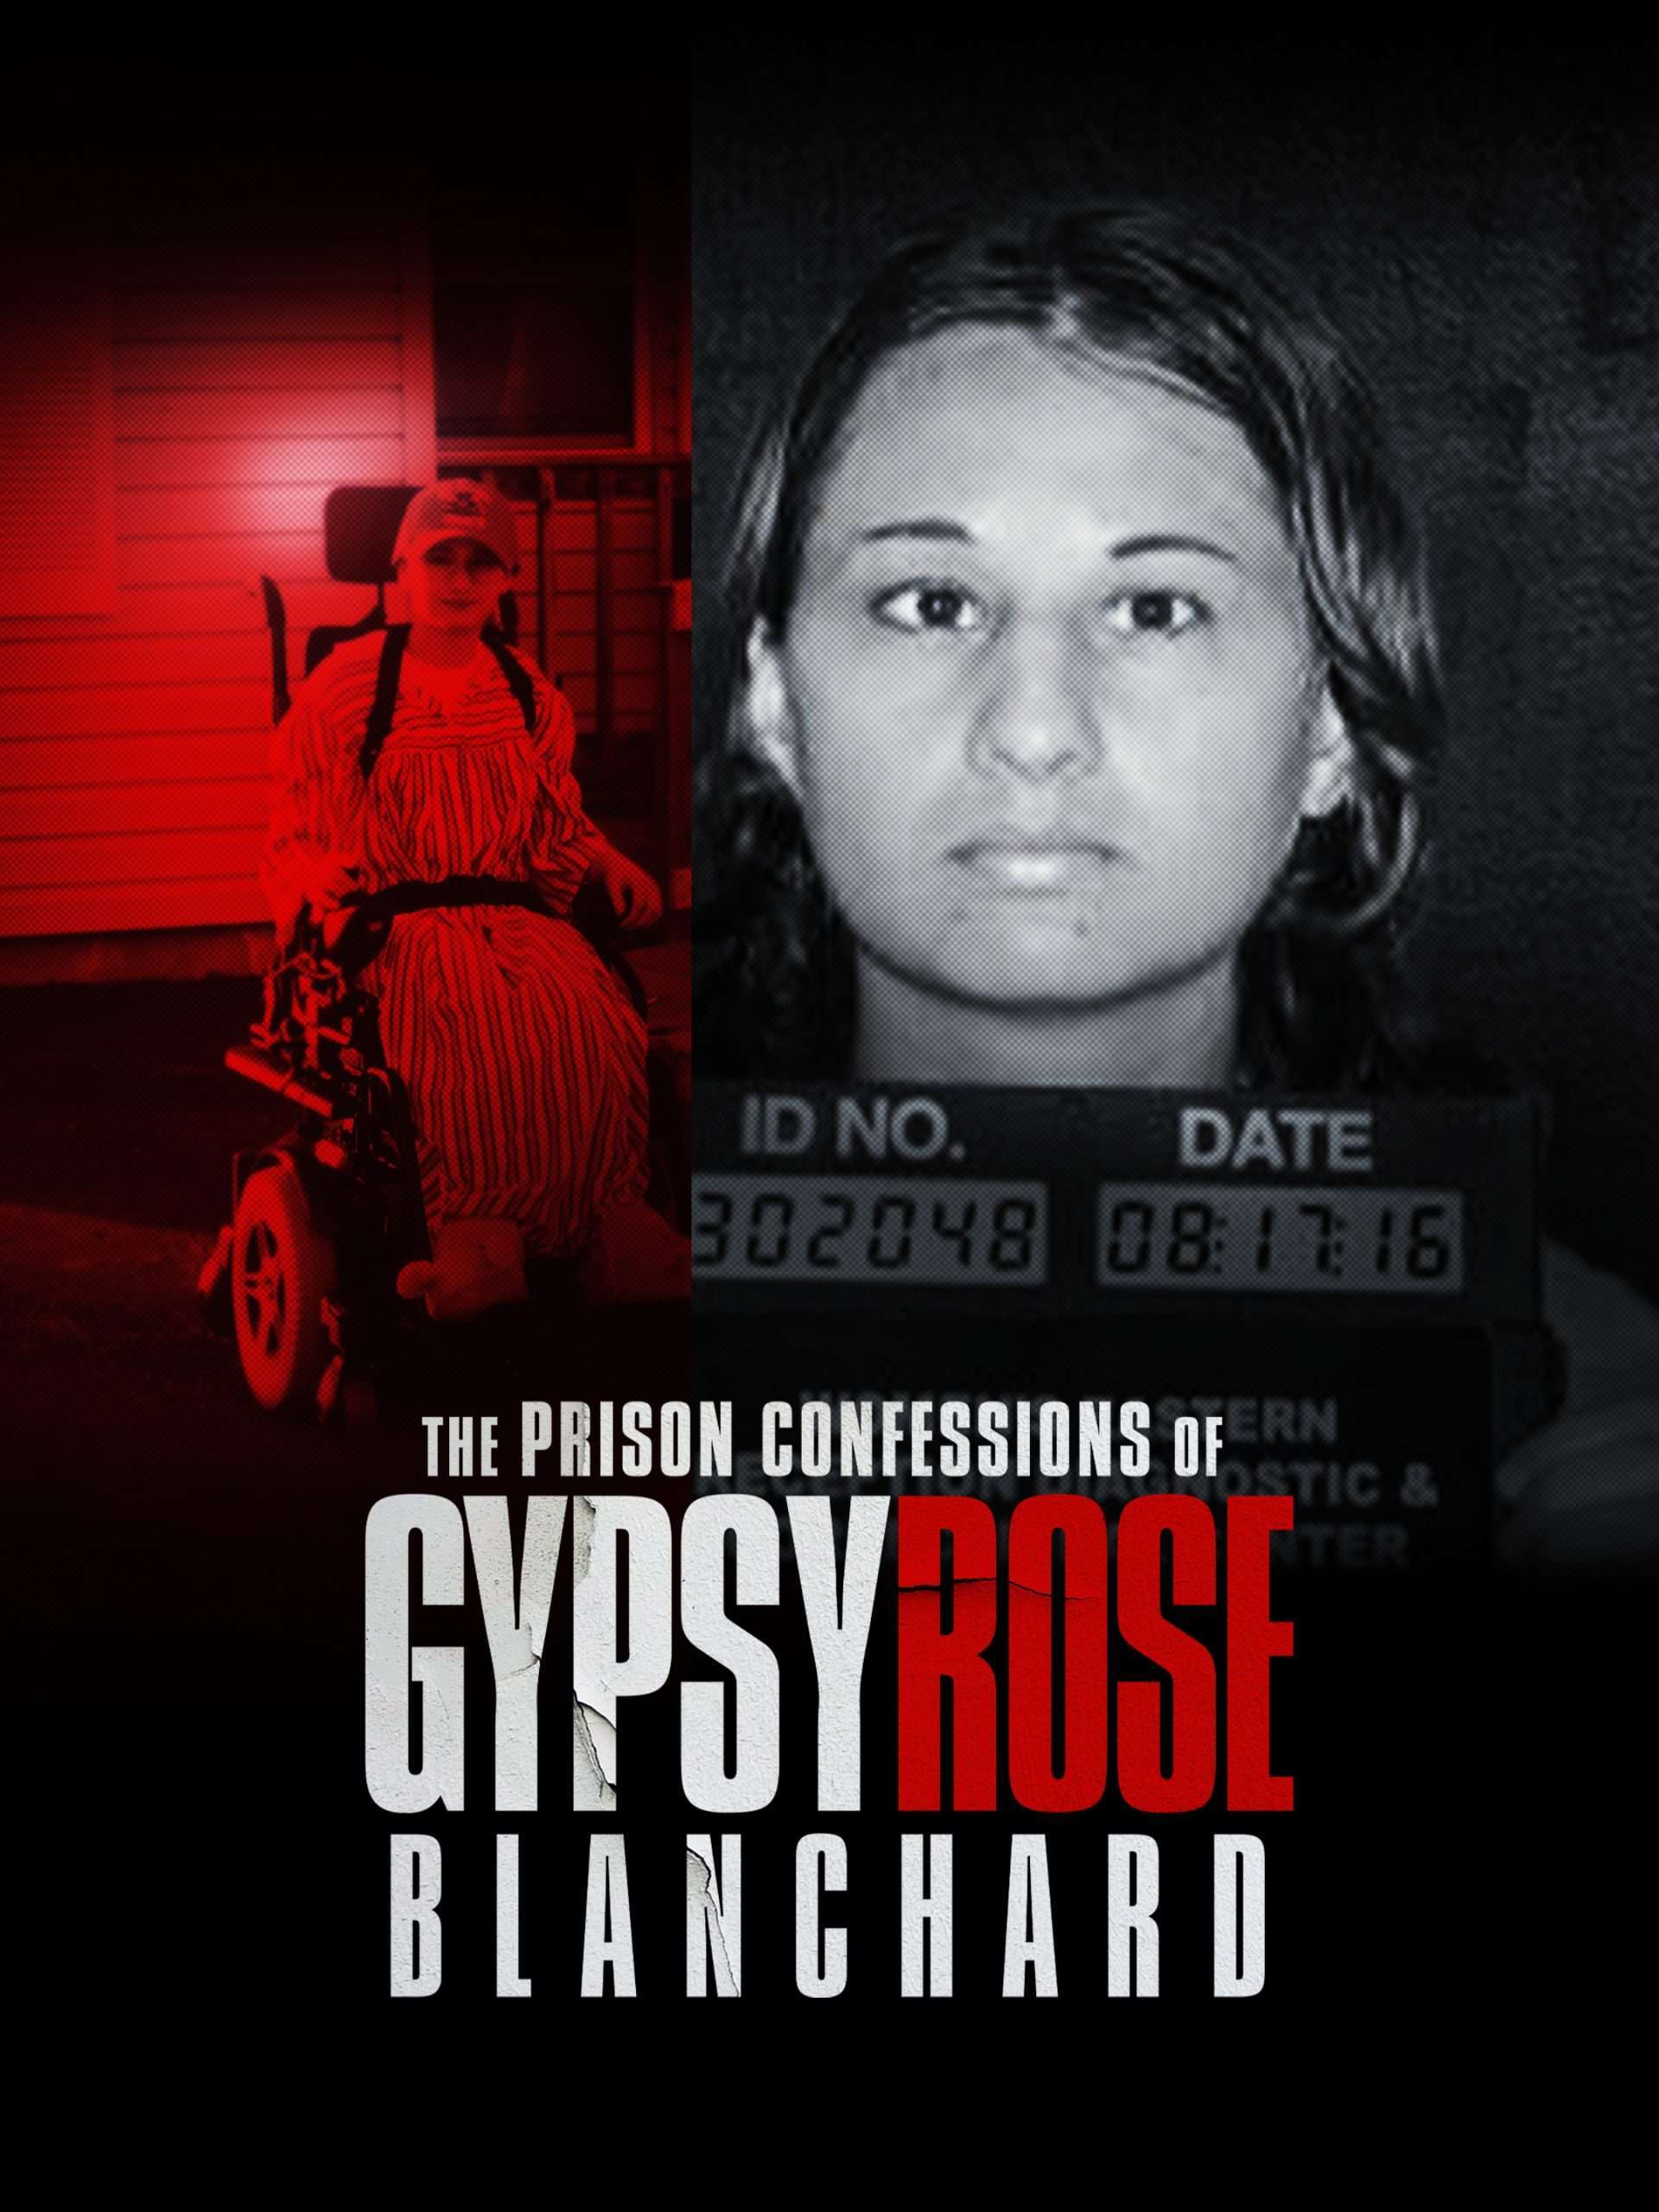 The Prison Confessions of Gypsy Rose Blanchard "Born a Prisoner; On the